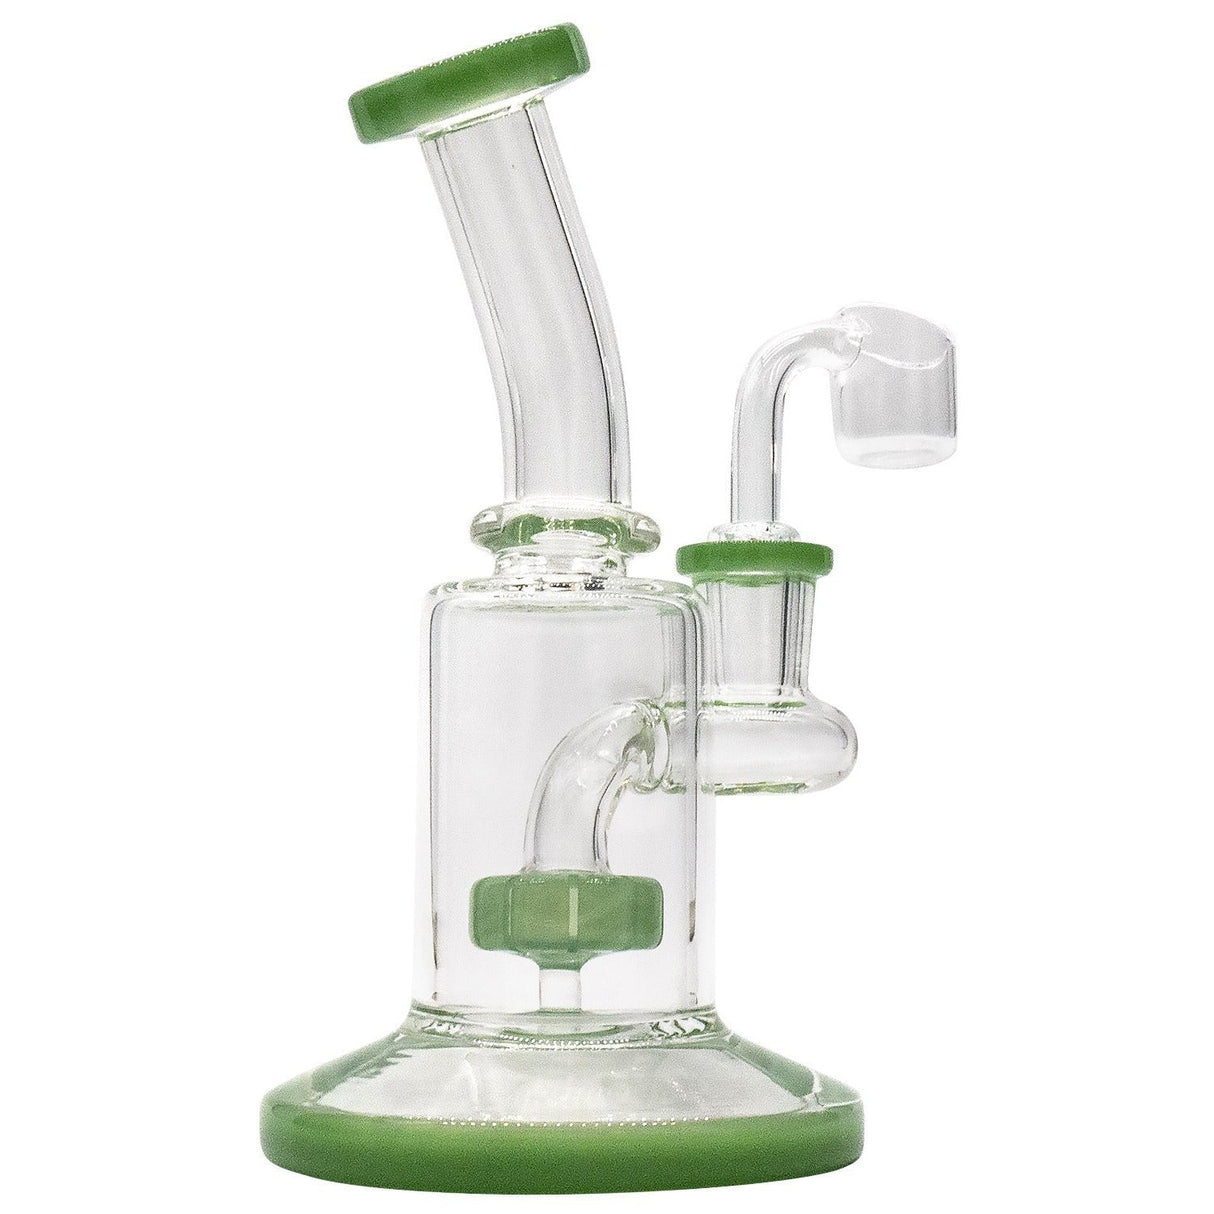 Glassic's "Spritz" 6.5" Dab Rig with Green Shower-head Perc, 90 Degree Joint